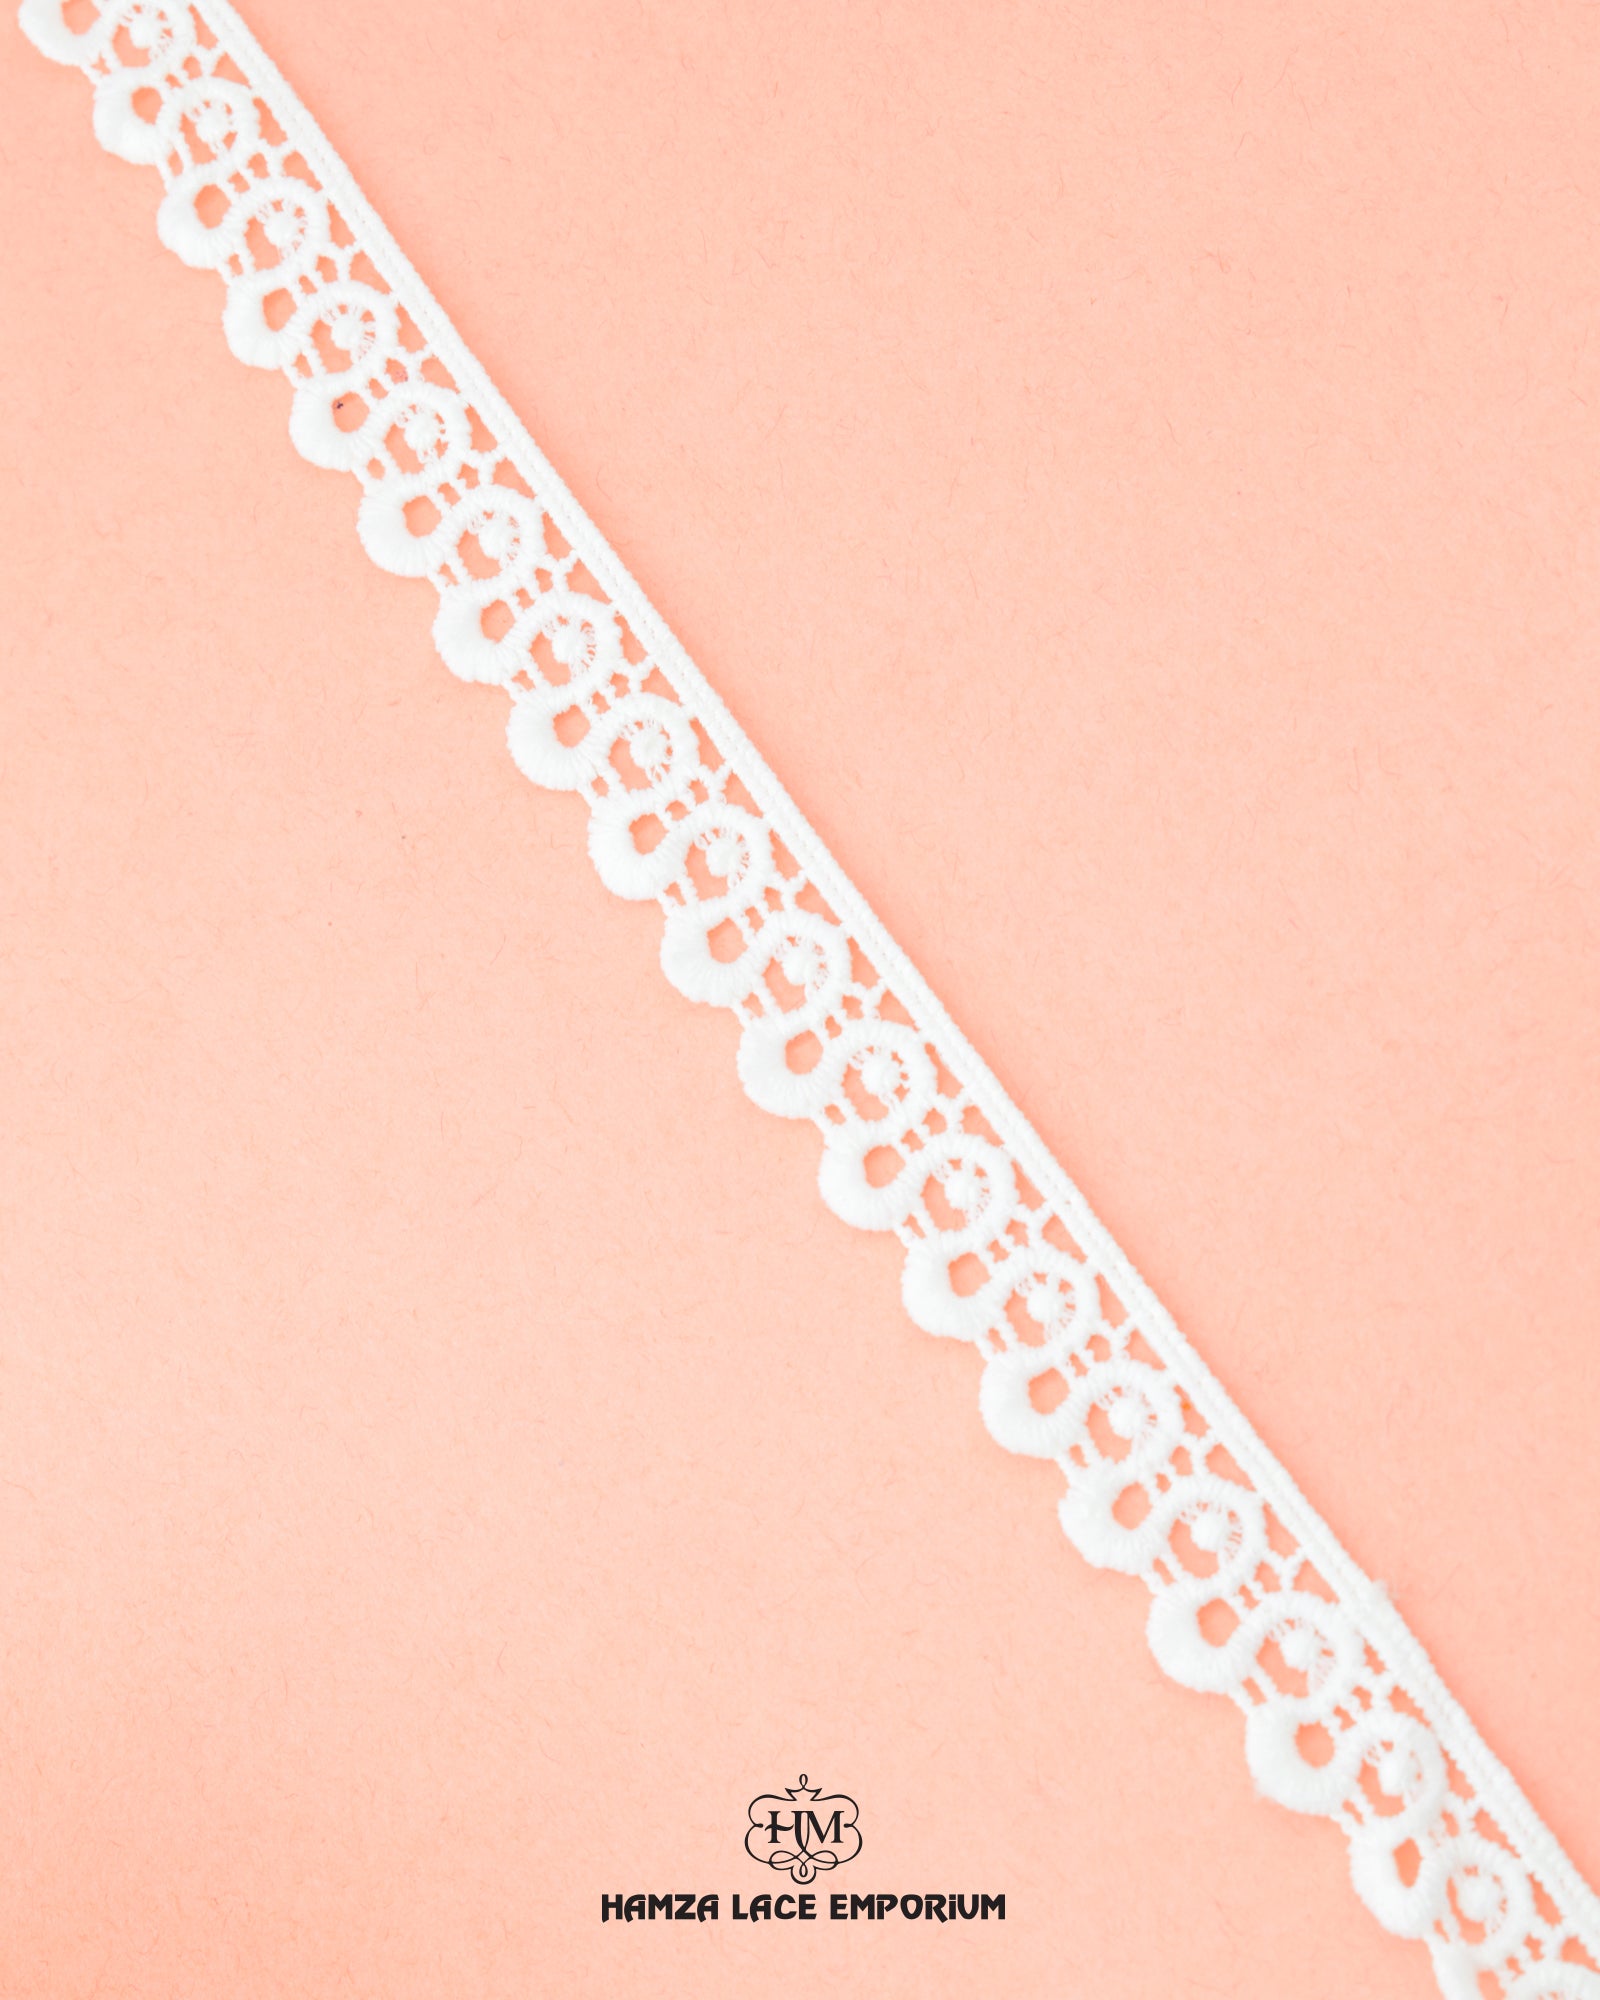 'Edging Loop Lace 23389' with the 'Hamza Lace' sign at the bottom